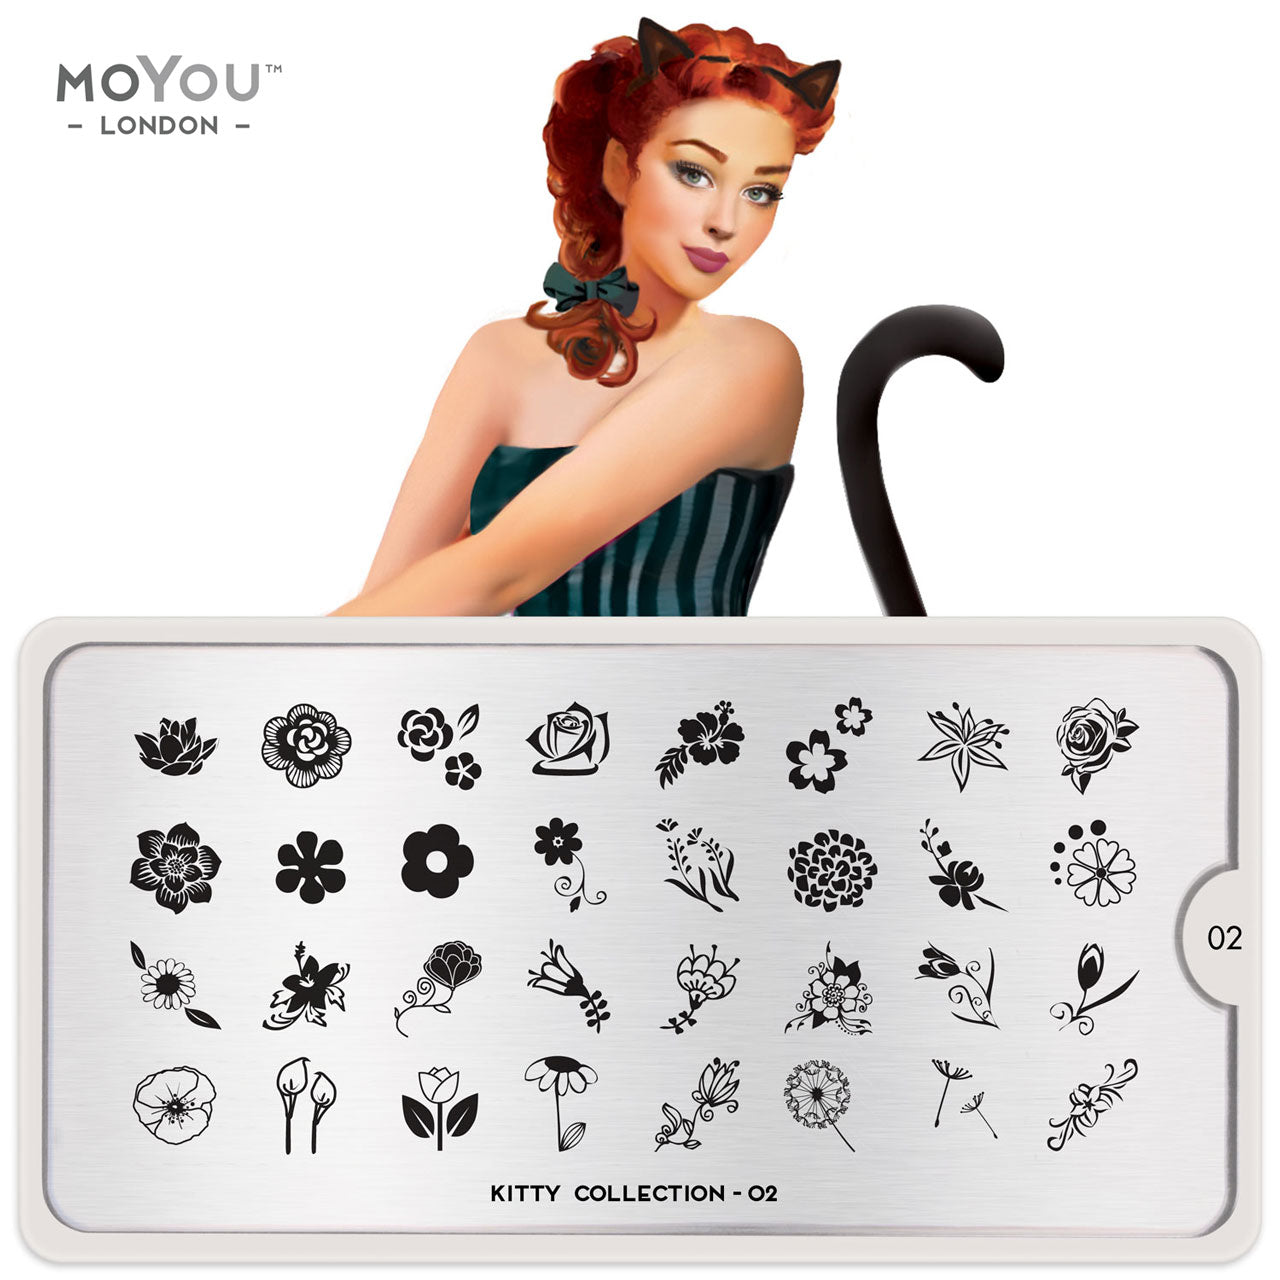 Plaque Stamping Kitty 02 - MoYou London